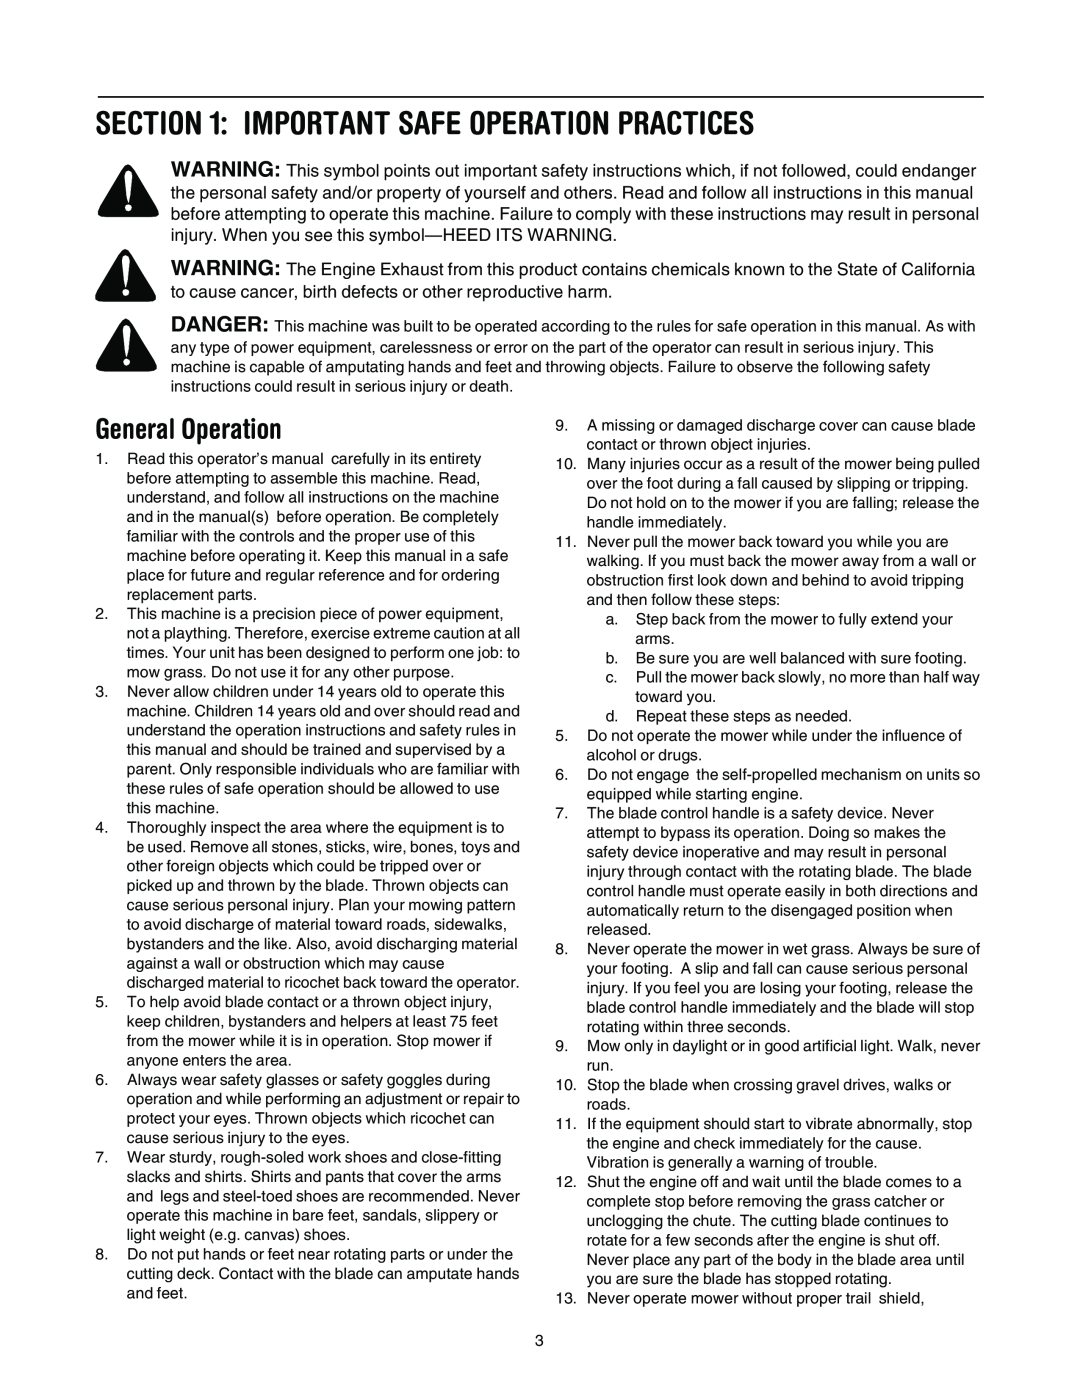 MTD 022, 021 manual Important Safe Operation Practices, General Operation 